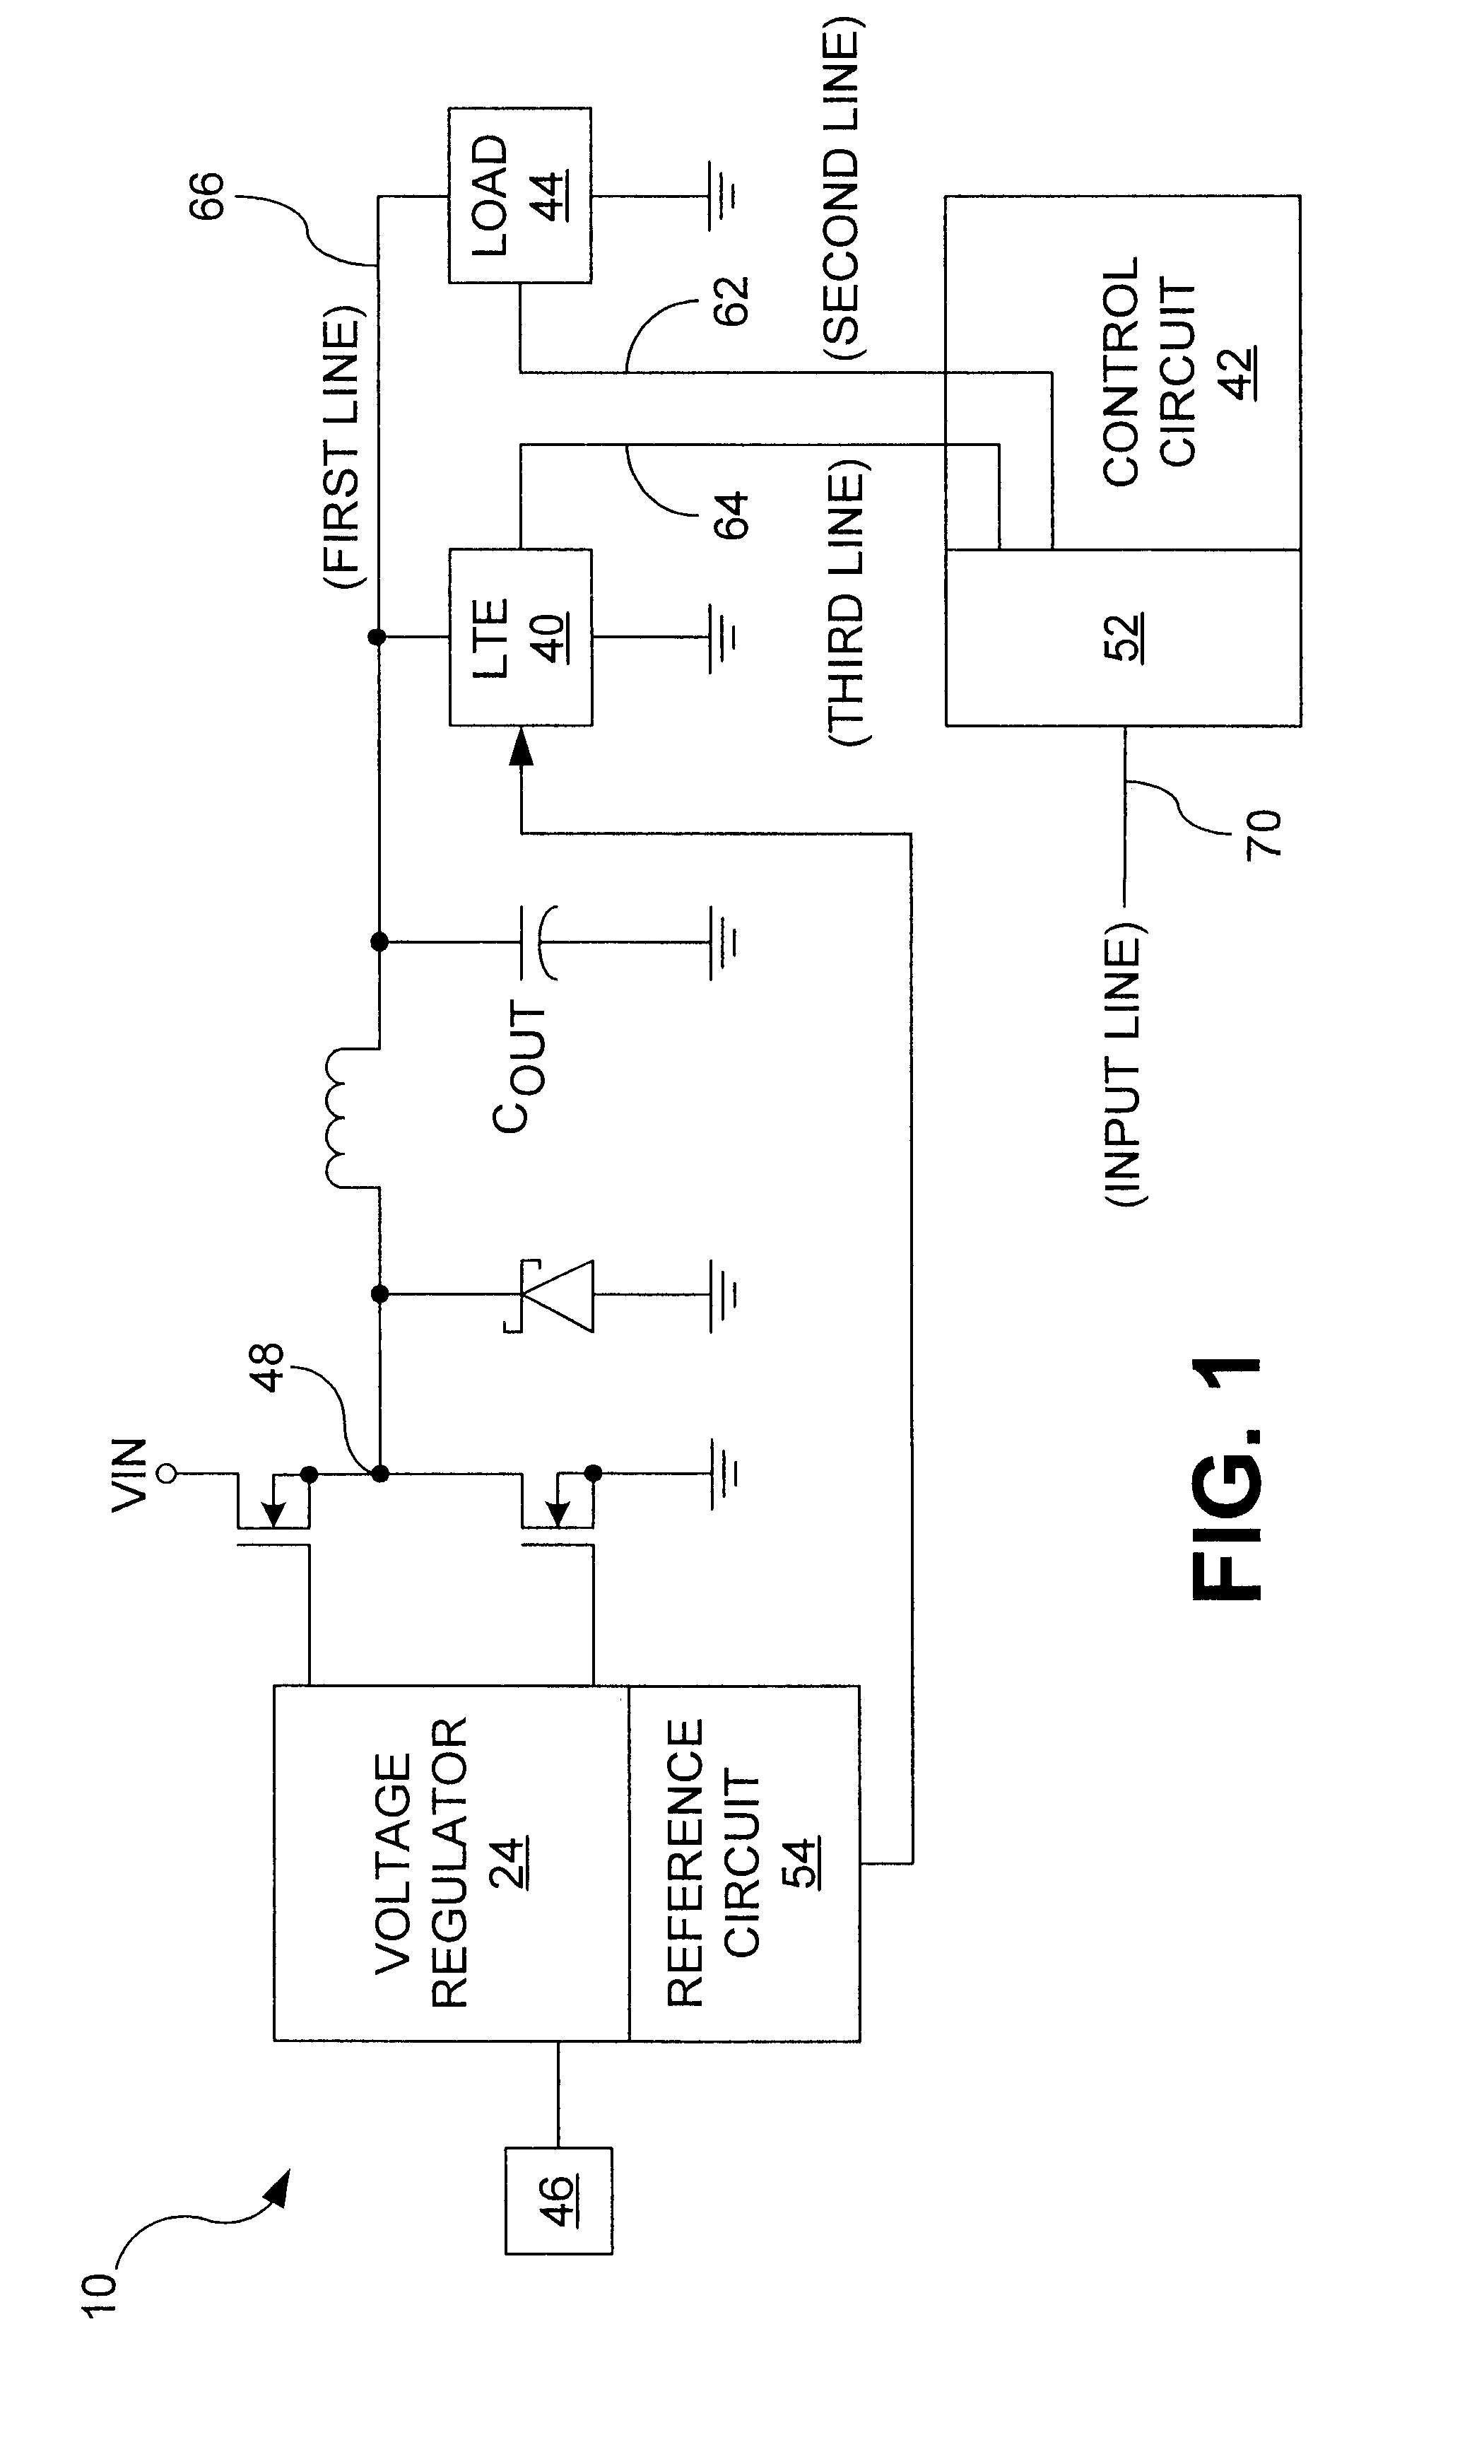 Programmable load transient compensator for reducing the transient response time to a load capable of operating at multiple power consumption levels